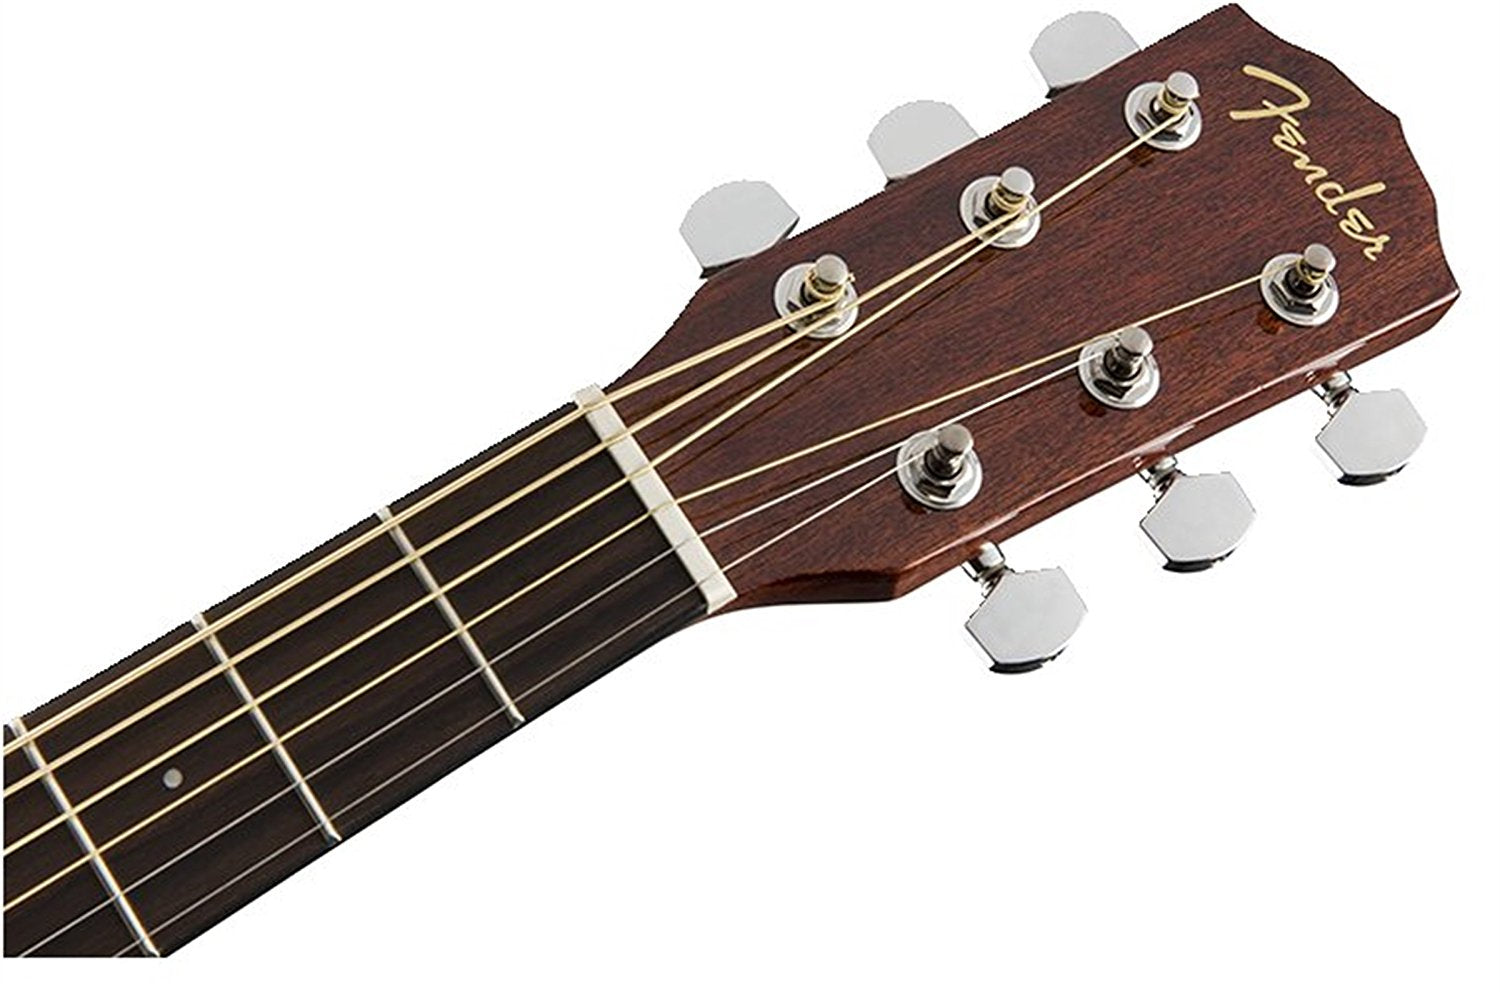 FENDER CD-60SCE ACOUSTIC GUITAR WITH EQ/PICKUP, NATURAL (CD 60SCE / CD60SCE), FENDER, ACOUSTIC GUITAR, fender-cd-60sce-acoustic-guitar-with-eq-pickup-natural-cd-60sce-cd60sce, ZOSO MUSIC SDN BHD